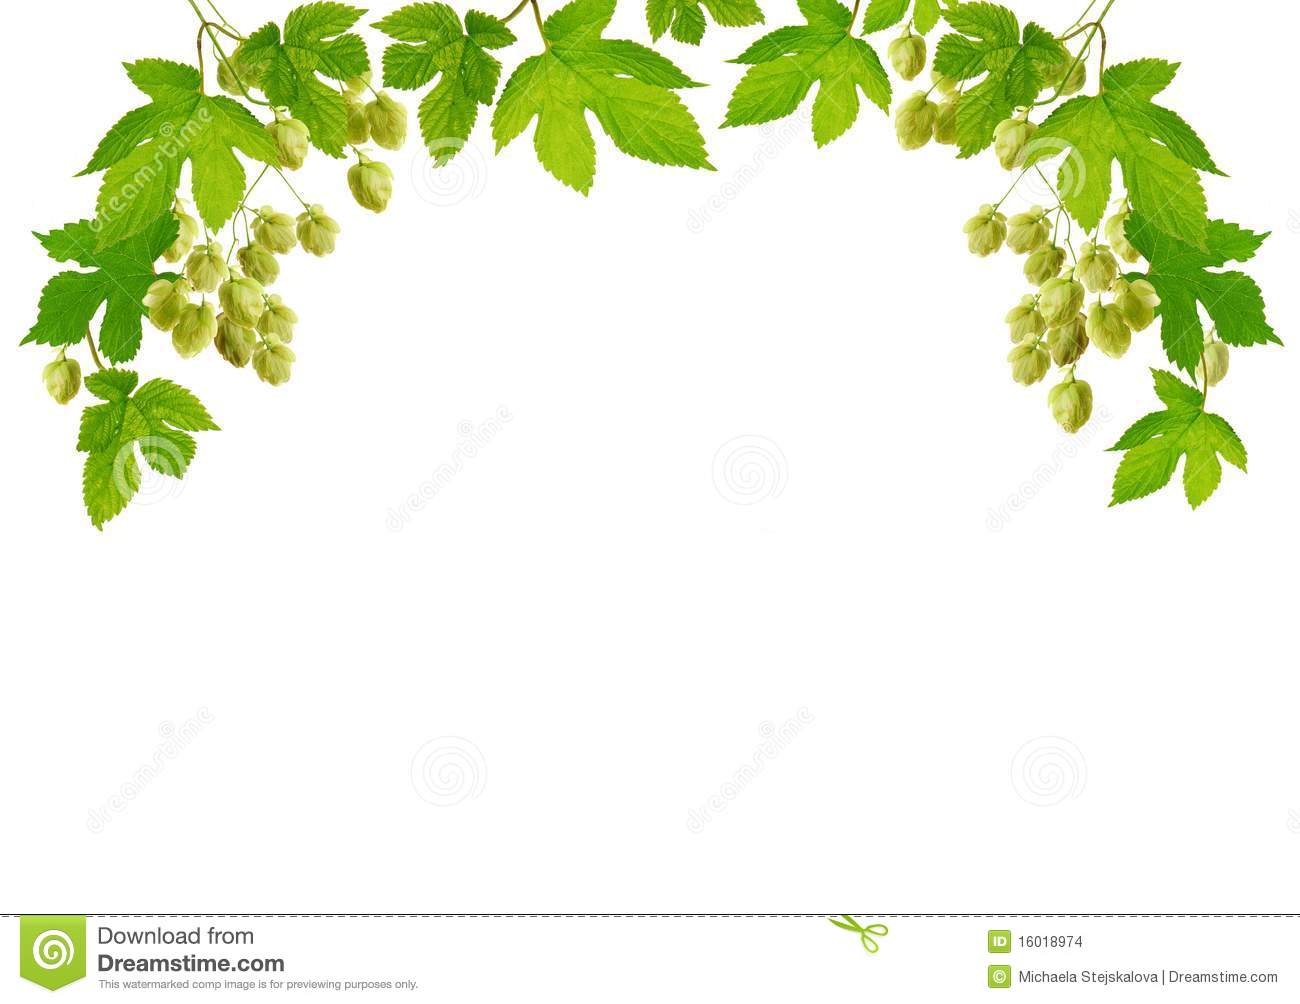 Hop Branches With Cones Stock Images   Image  16018974